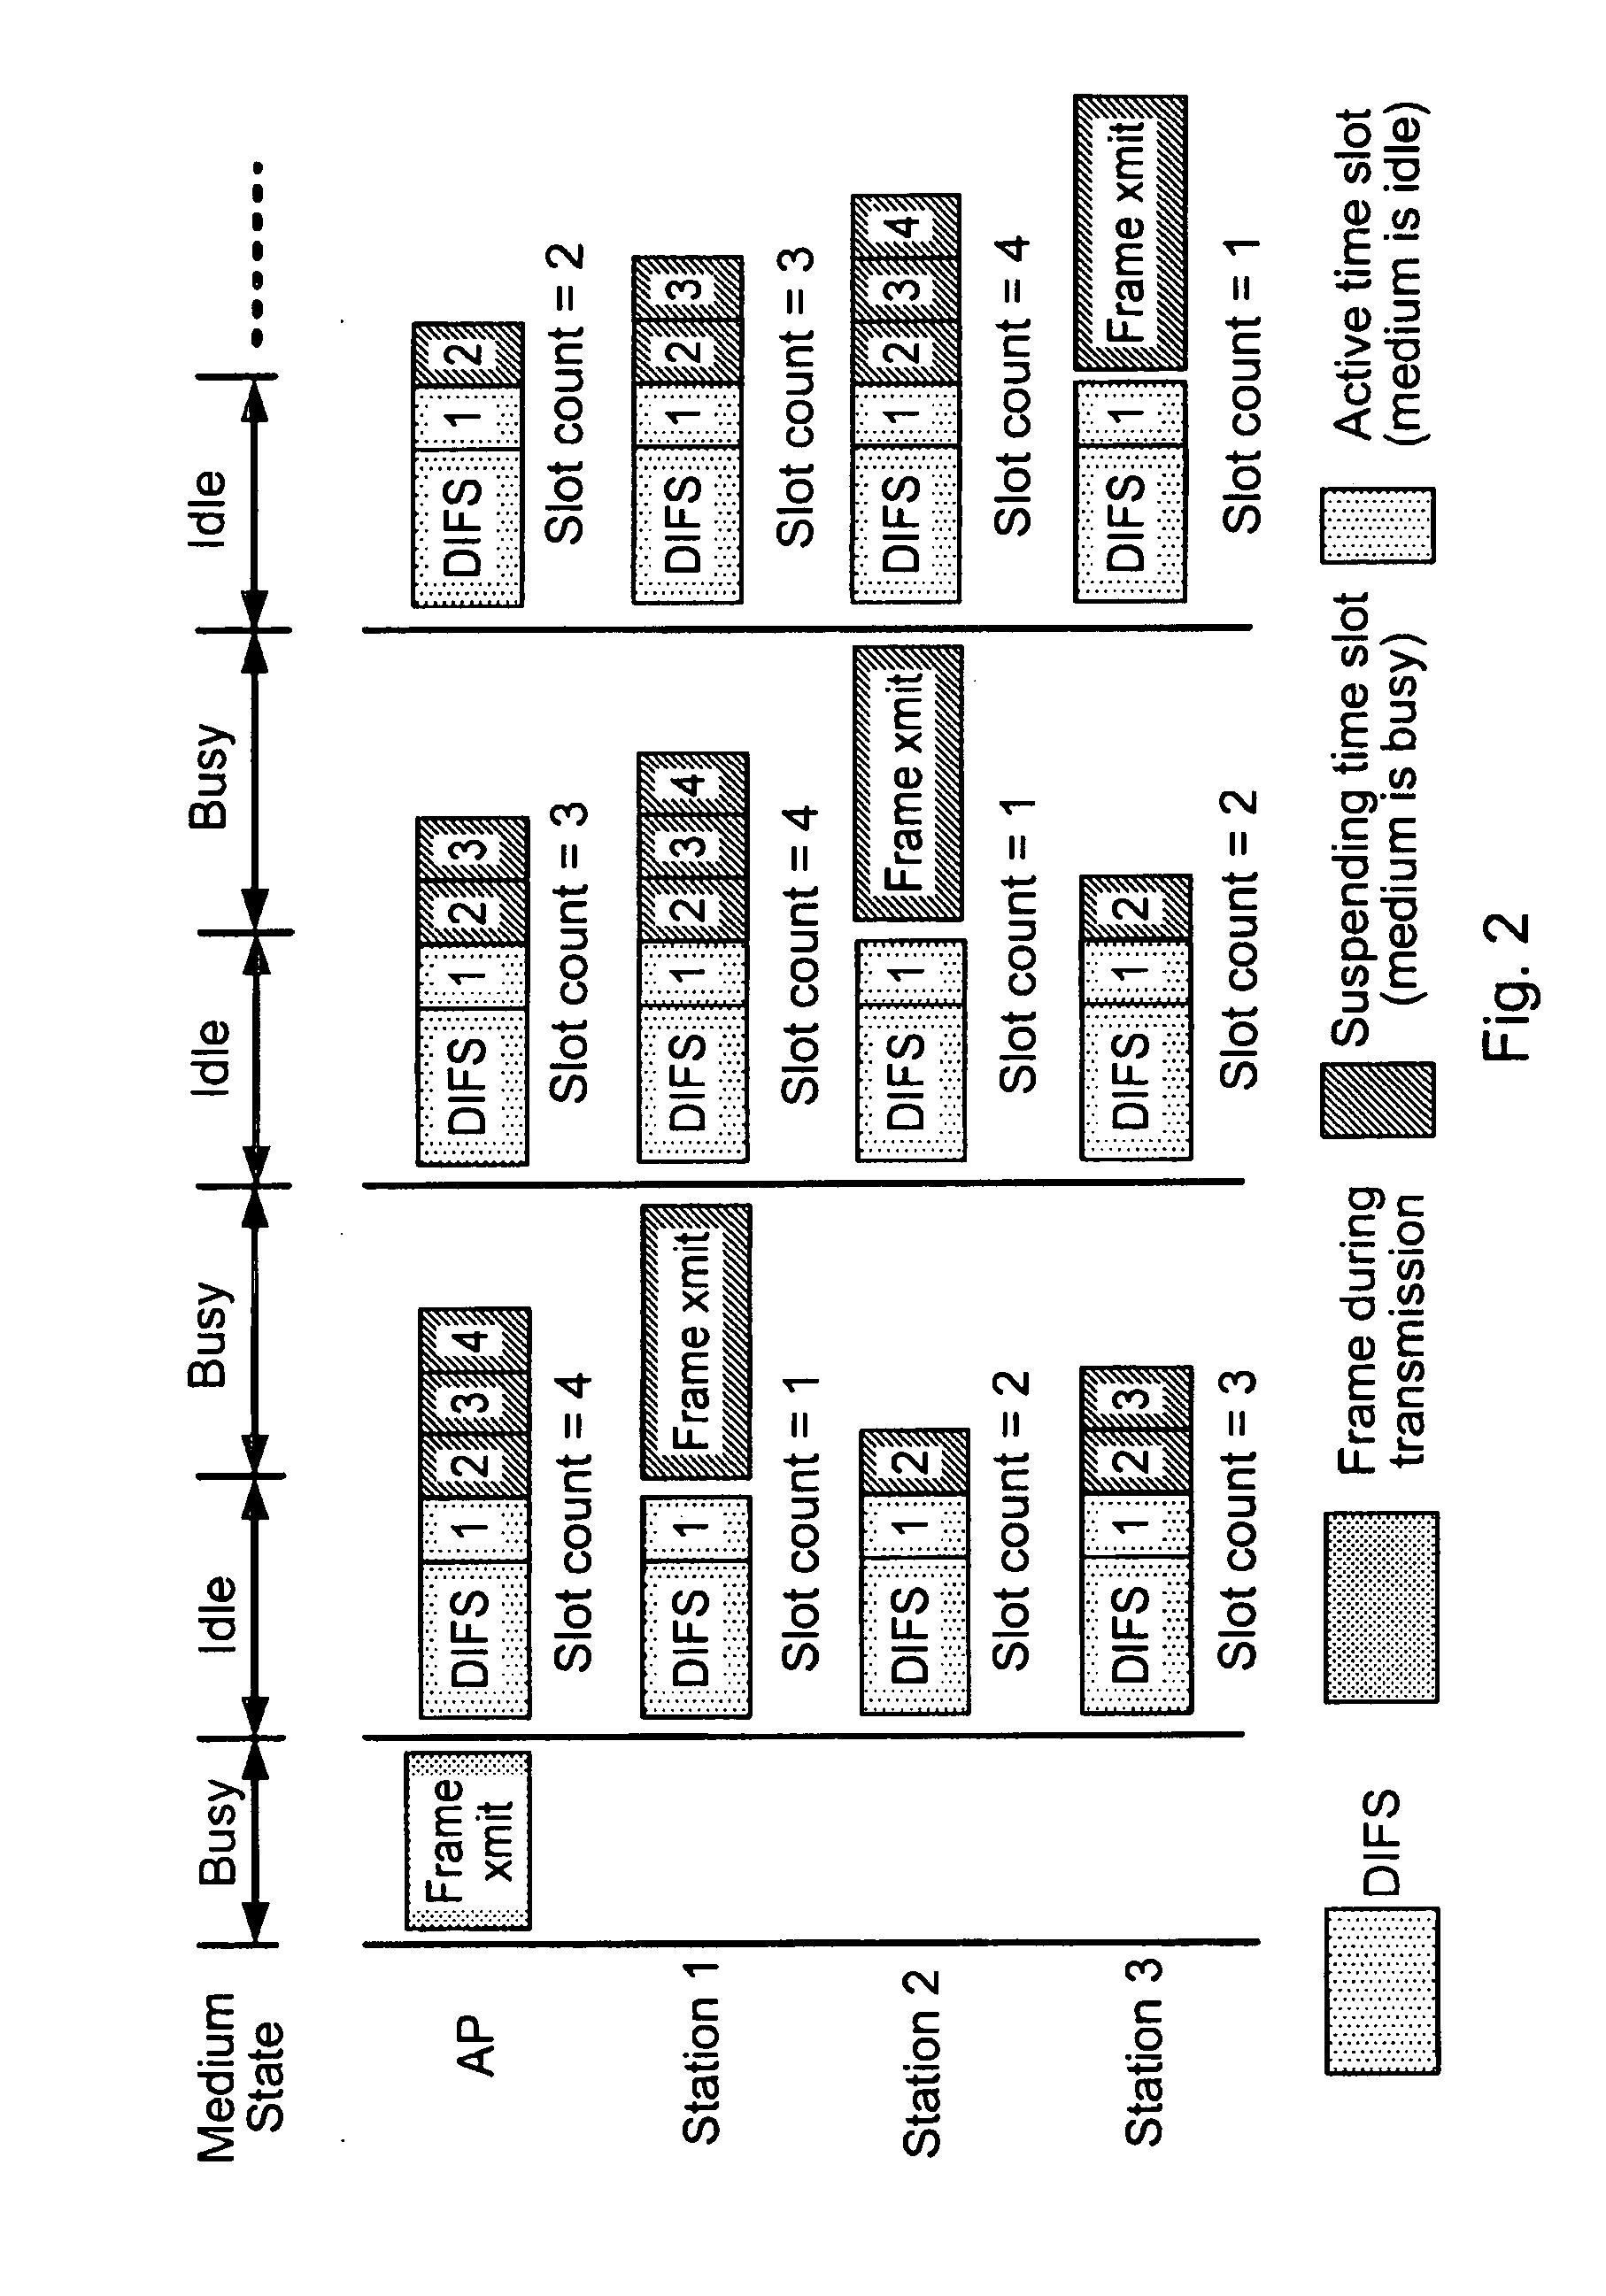 Method and apparatus for media access in contention-based networks